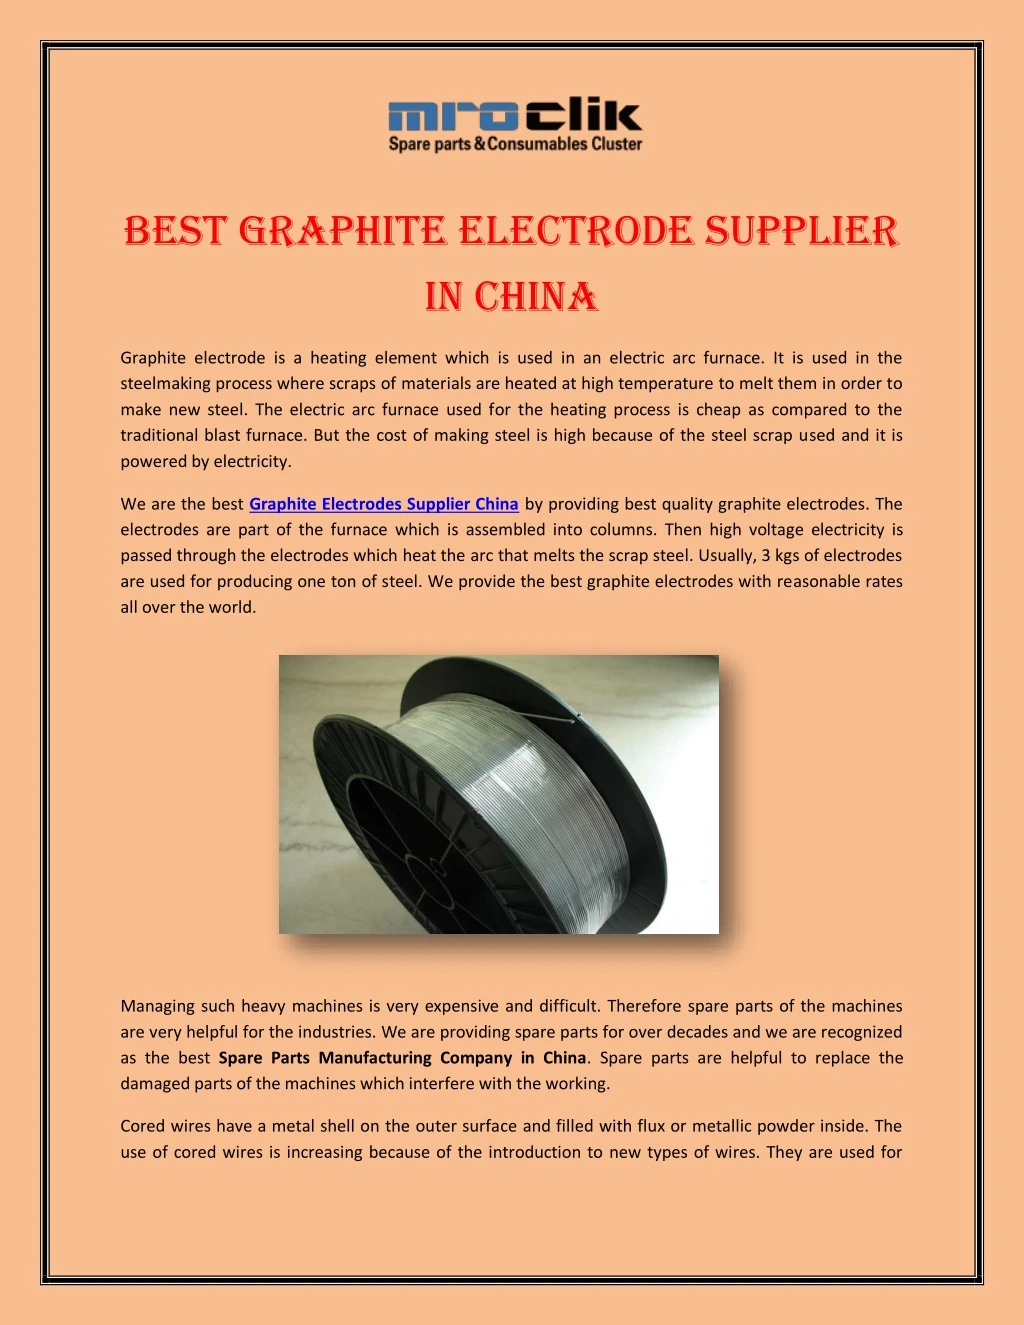 best graphite electrode supplier in china